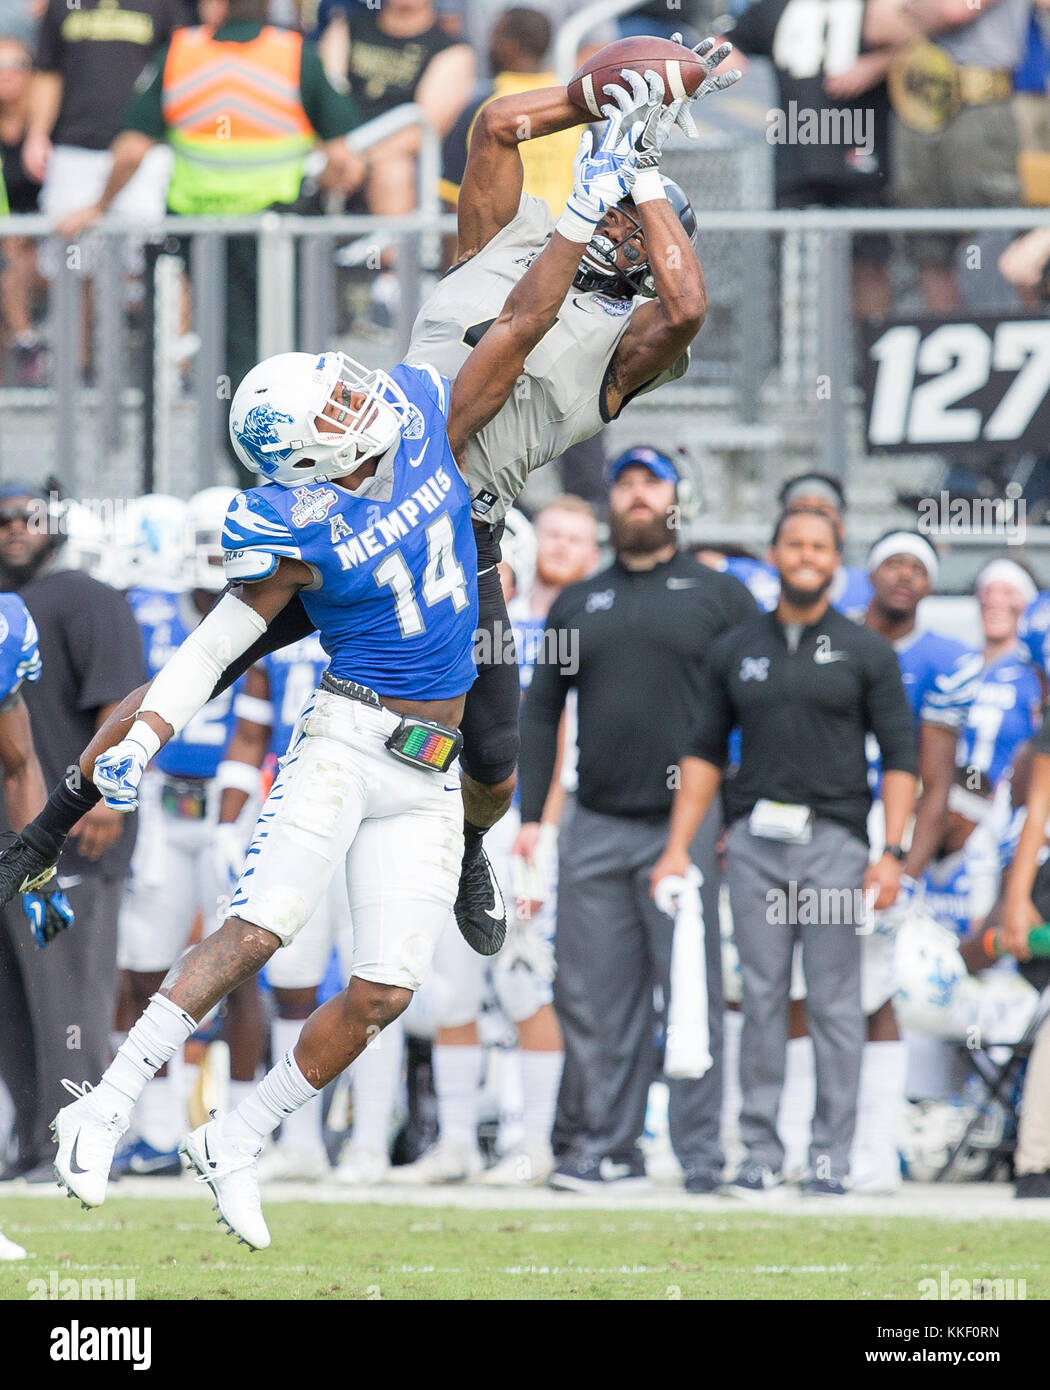 Orlando, FL, USA. 2nd Dec, 2017. UCF receiver Tre'Quan Smith #4 catches a long pass over the arms of Memphis defender Jonathan Cook #14 during the AAC Championship football game between the UCF Knights and the Memphis Tigers at the Spectrum Stadium in Orlando, FL. Kyle Okita/CSM/Alamy Live News Stock Photo